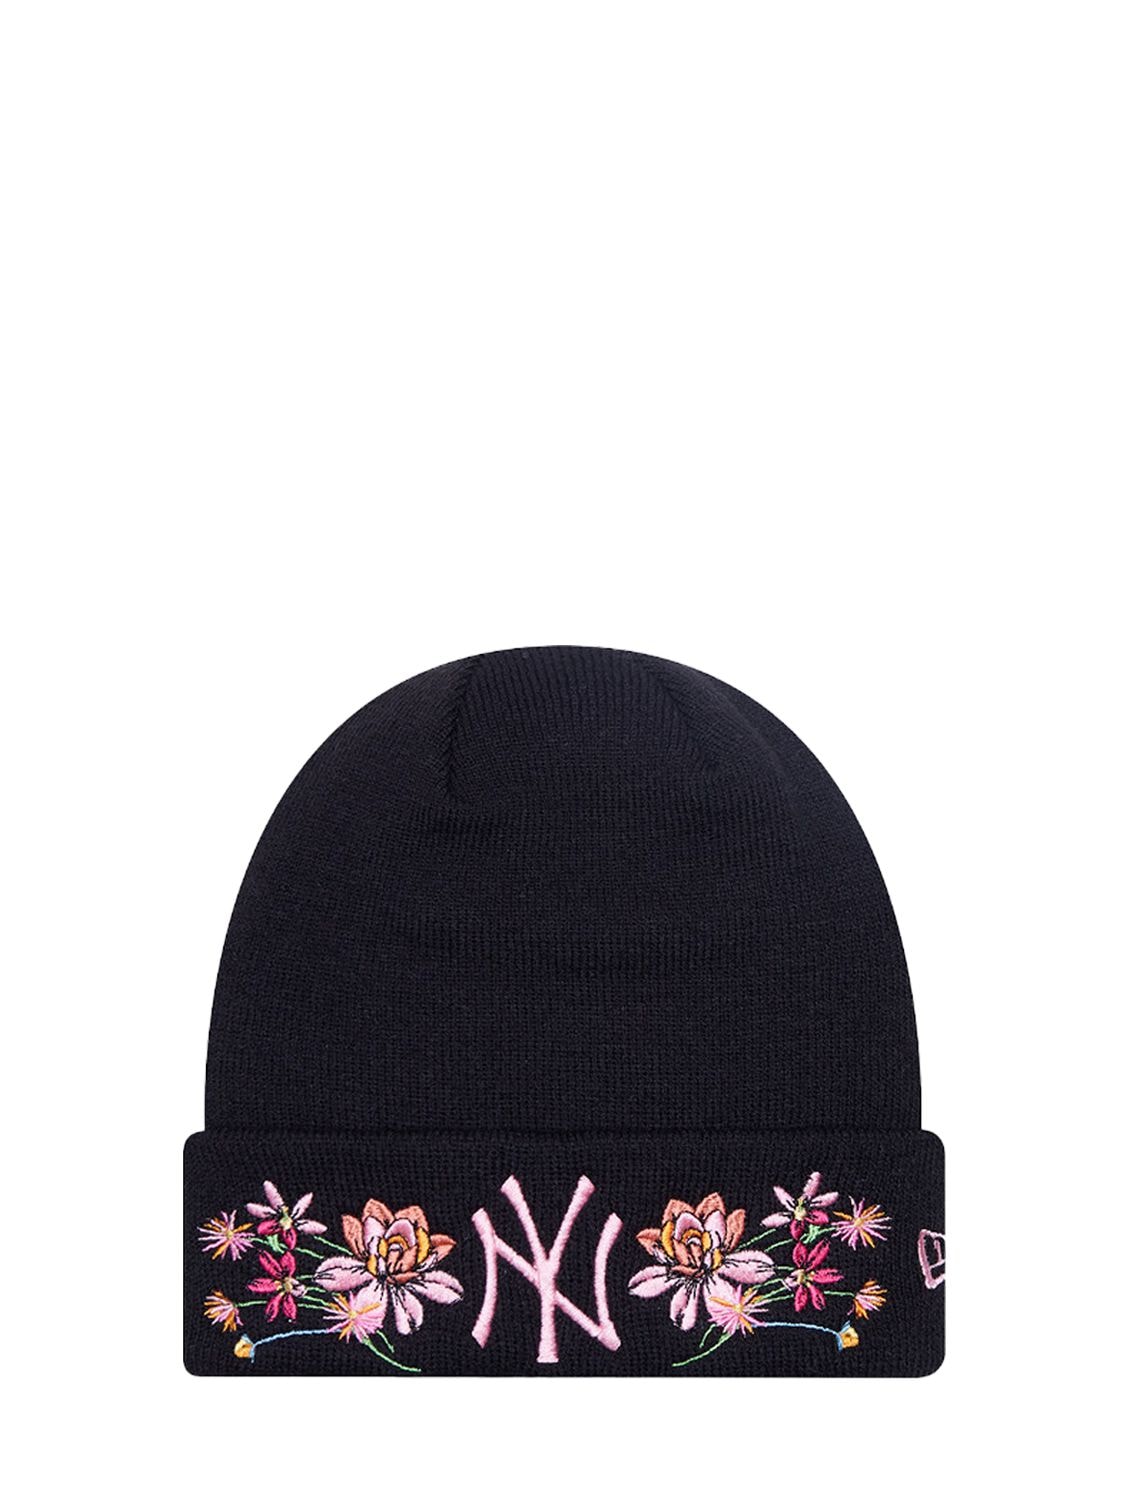 Image of Yankees Embroidered Tech Beanie